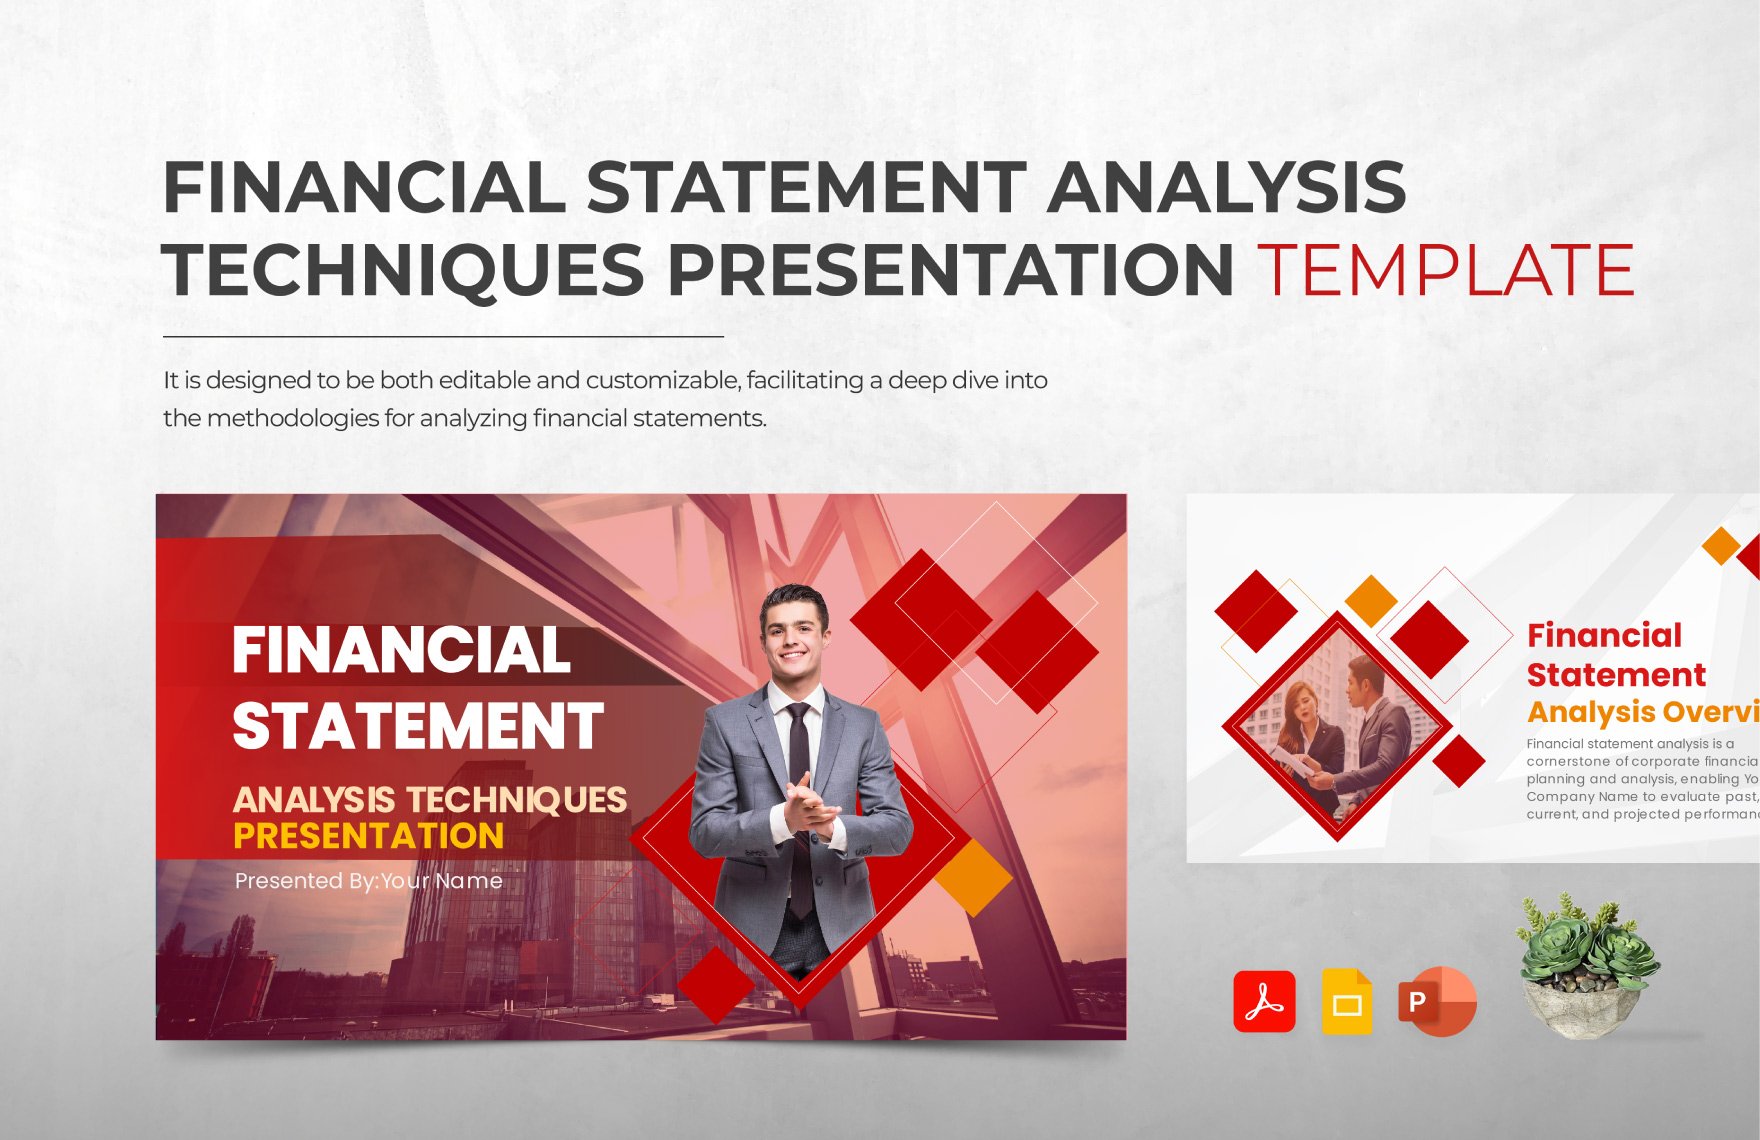 Free Financial Statement Analysis Techniques Presentation Template